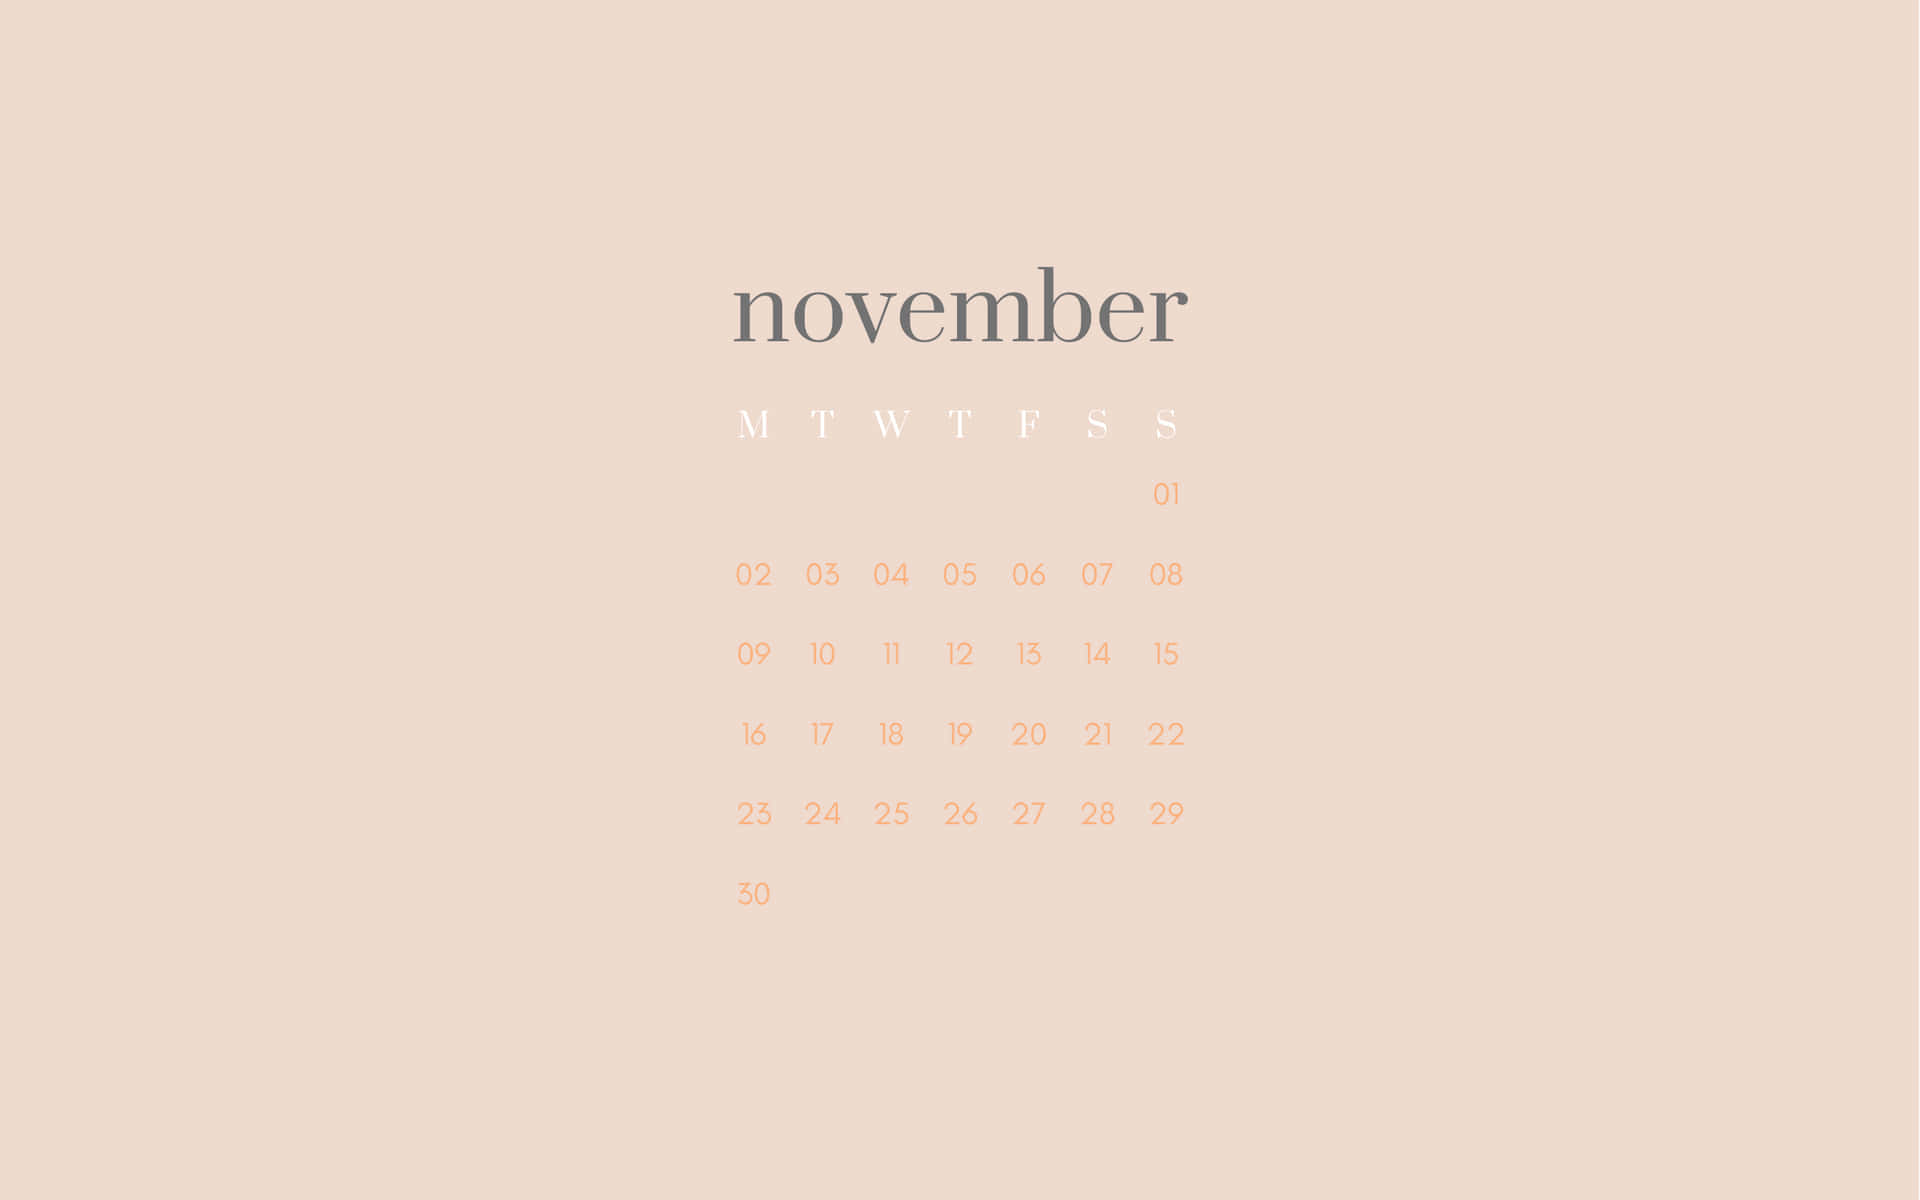 Welcome to November -- a time for cozy sweater weather, colorful leaves, and family gatherings